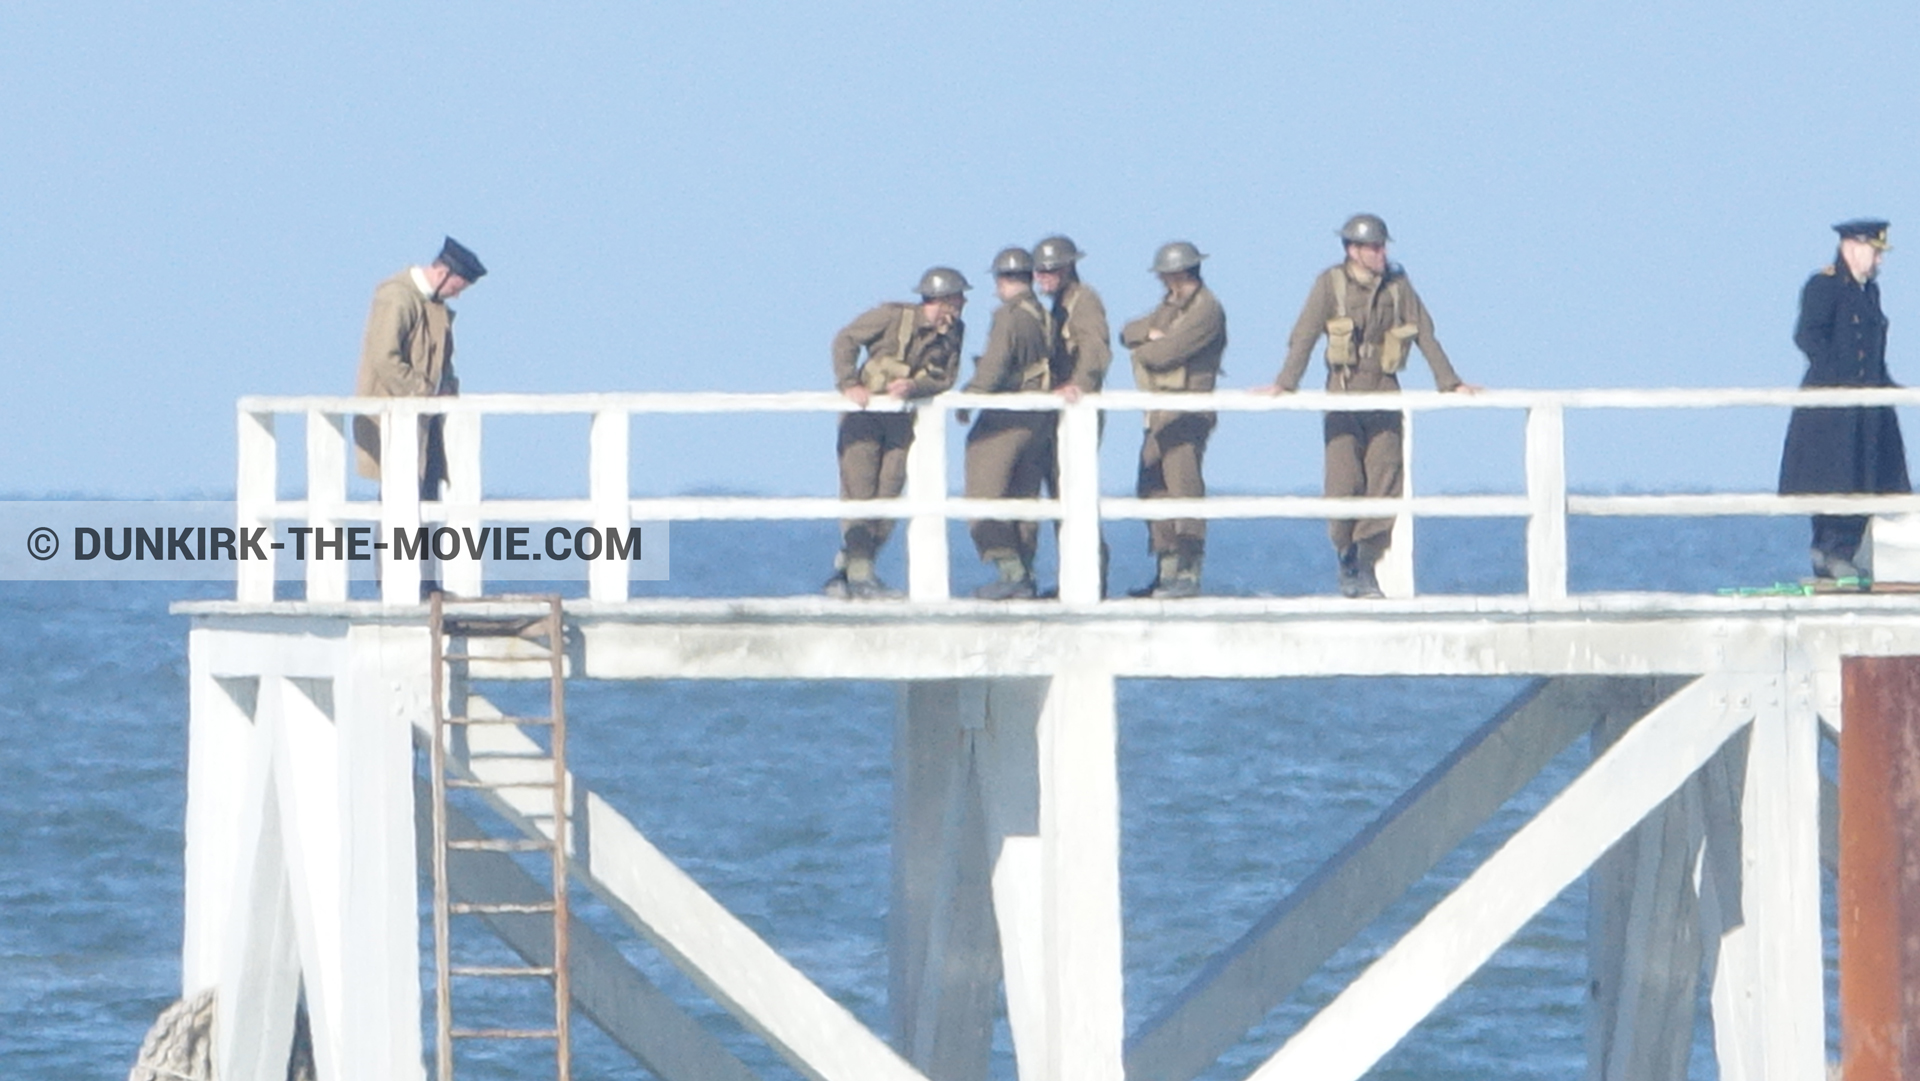 Picture with actor, blue sky, supernumeraries, EST pier, calm sea,  from behind the scene of the Dunkirk movie by Nolan